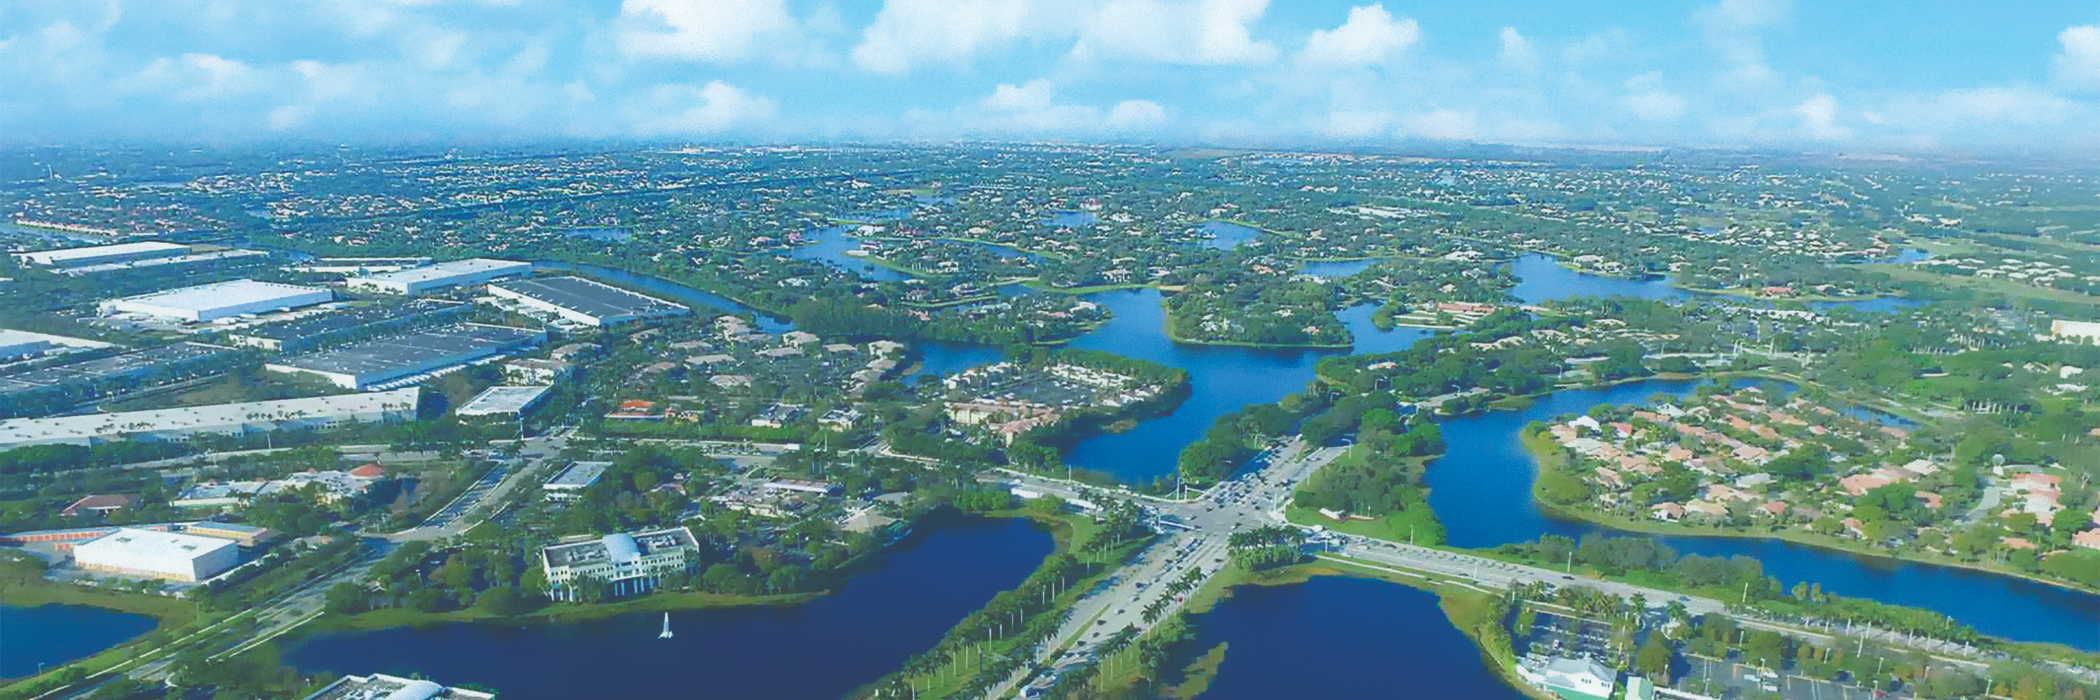 Aerial view of the ocean and city of Weston, FL